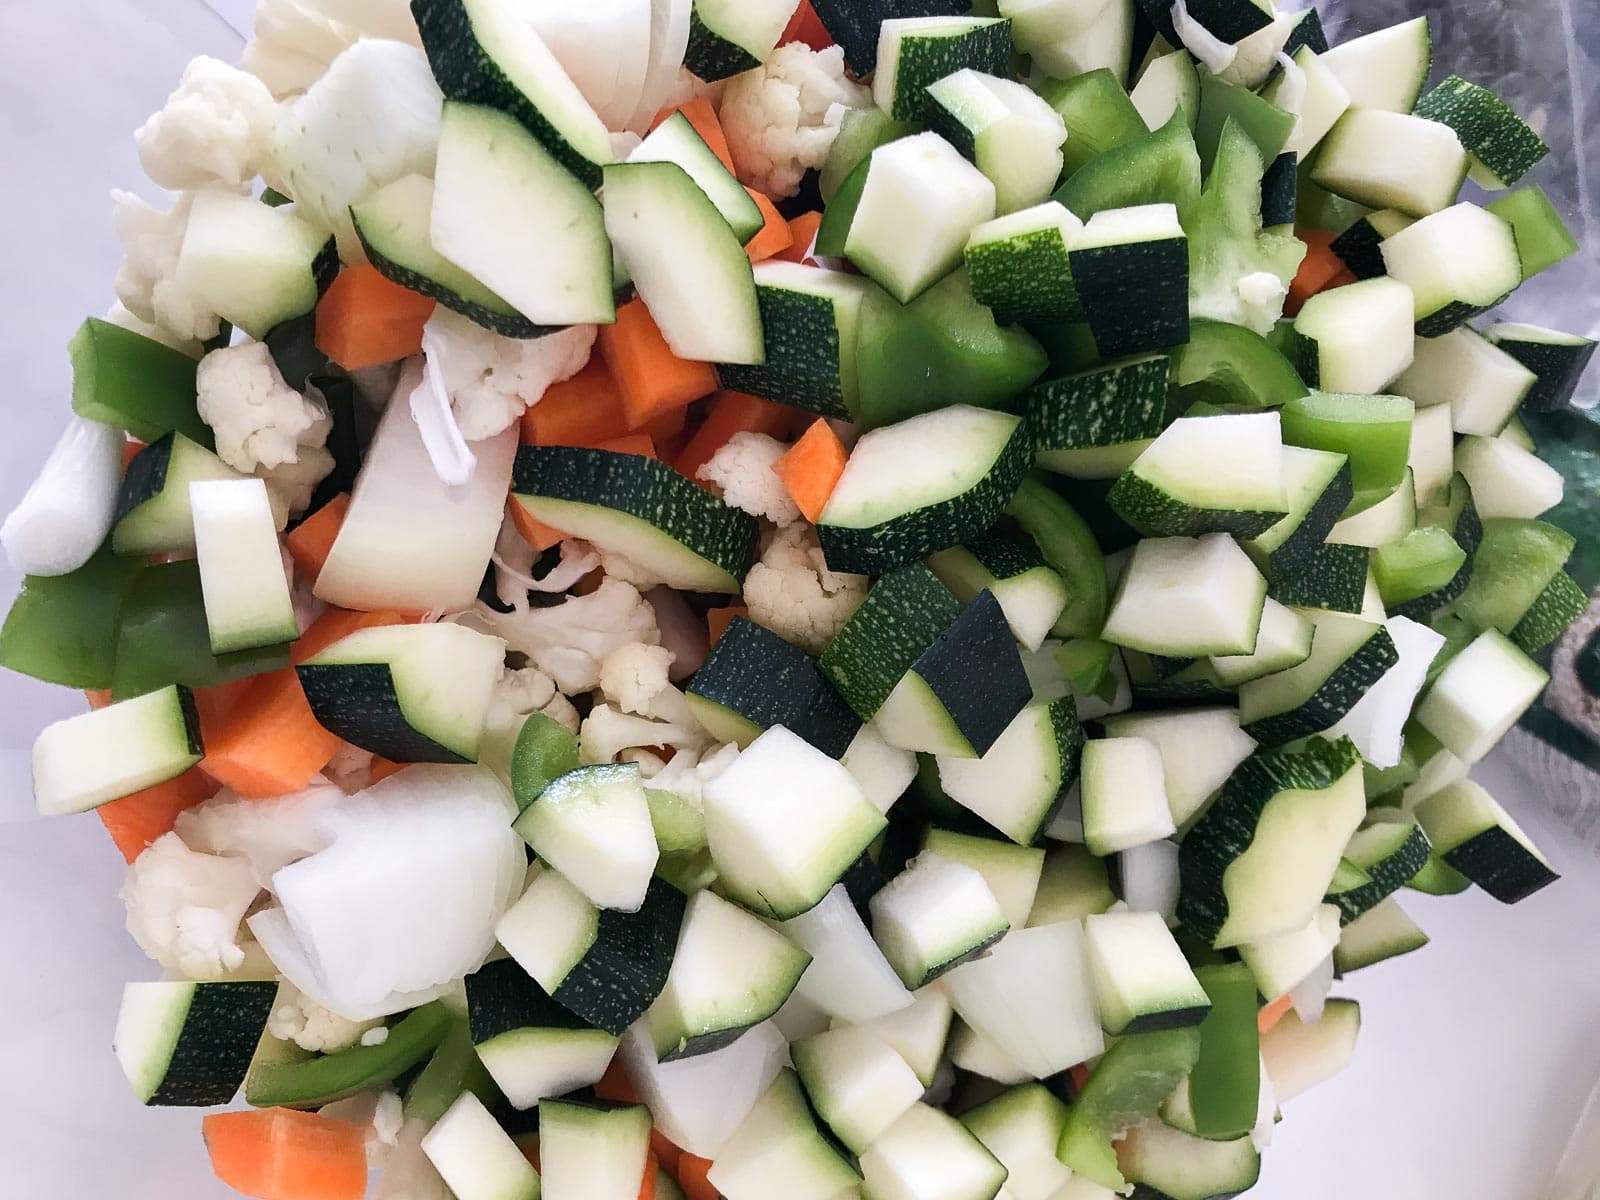 Vegetables, such as cauliflower, courgettes, carrots and onions chopped into bite sized pieces.